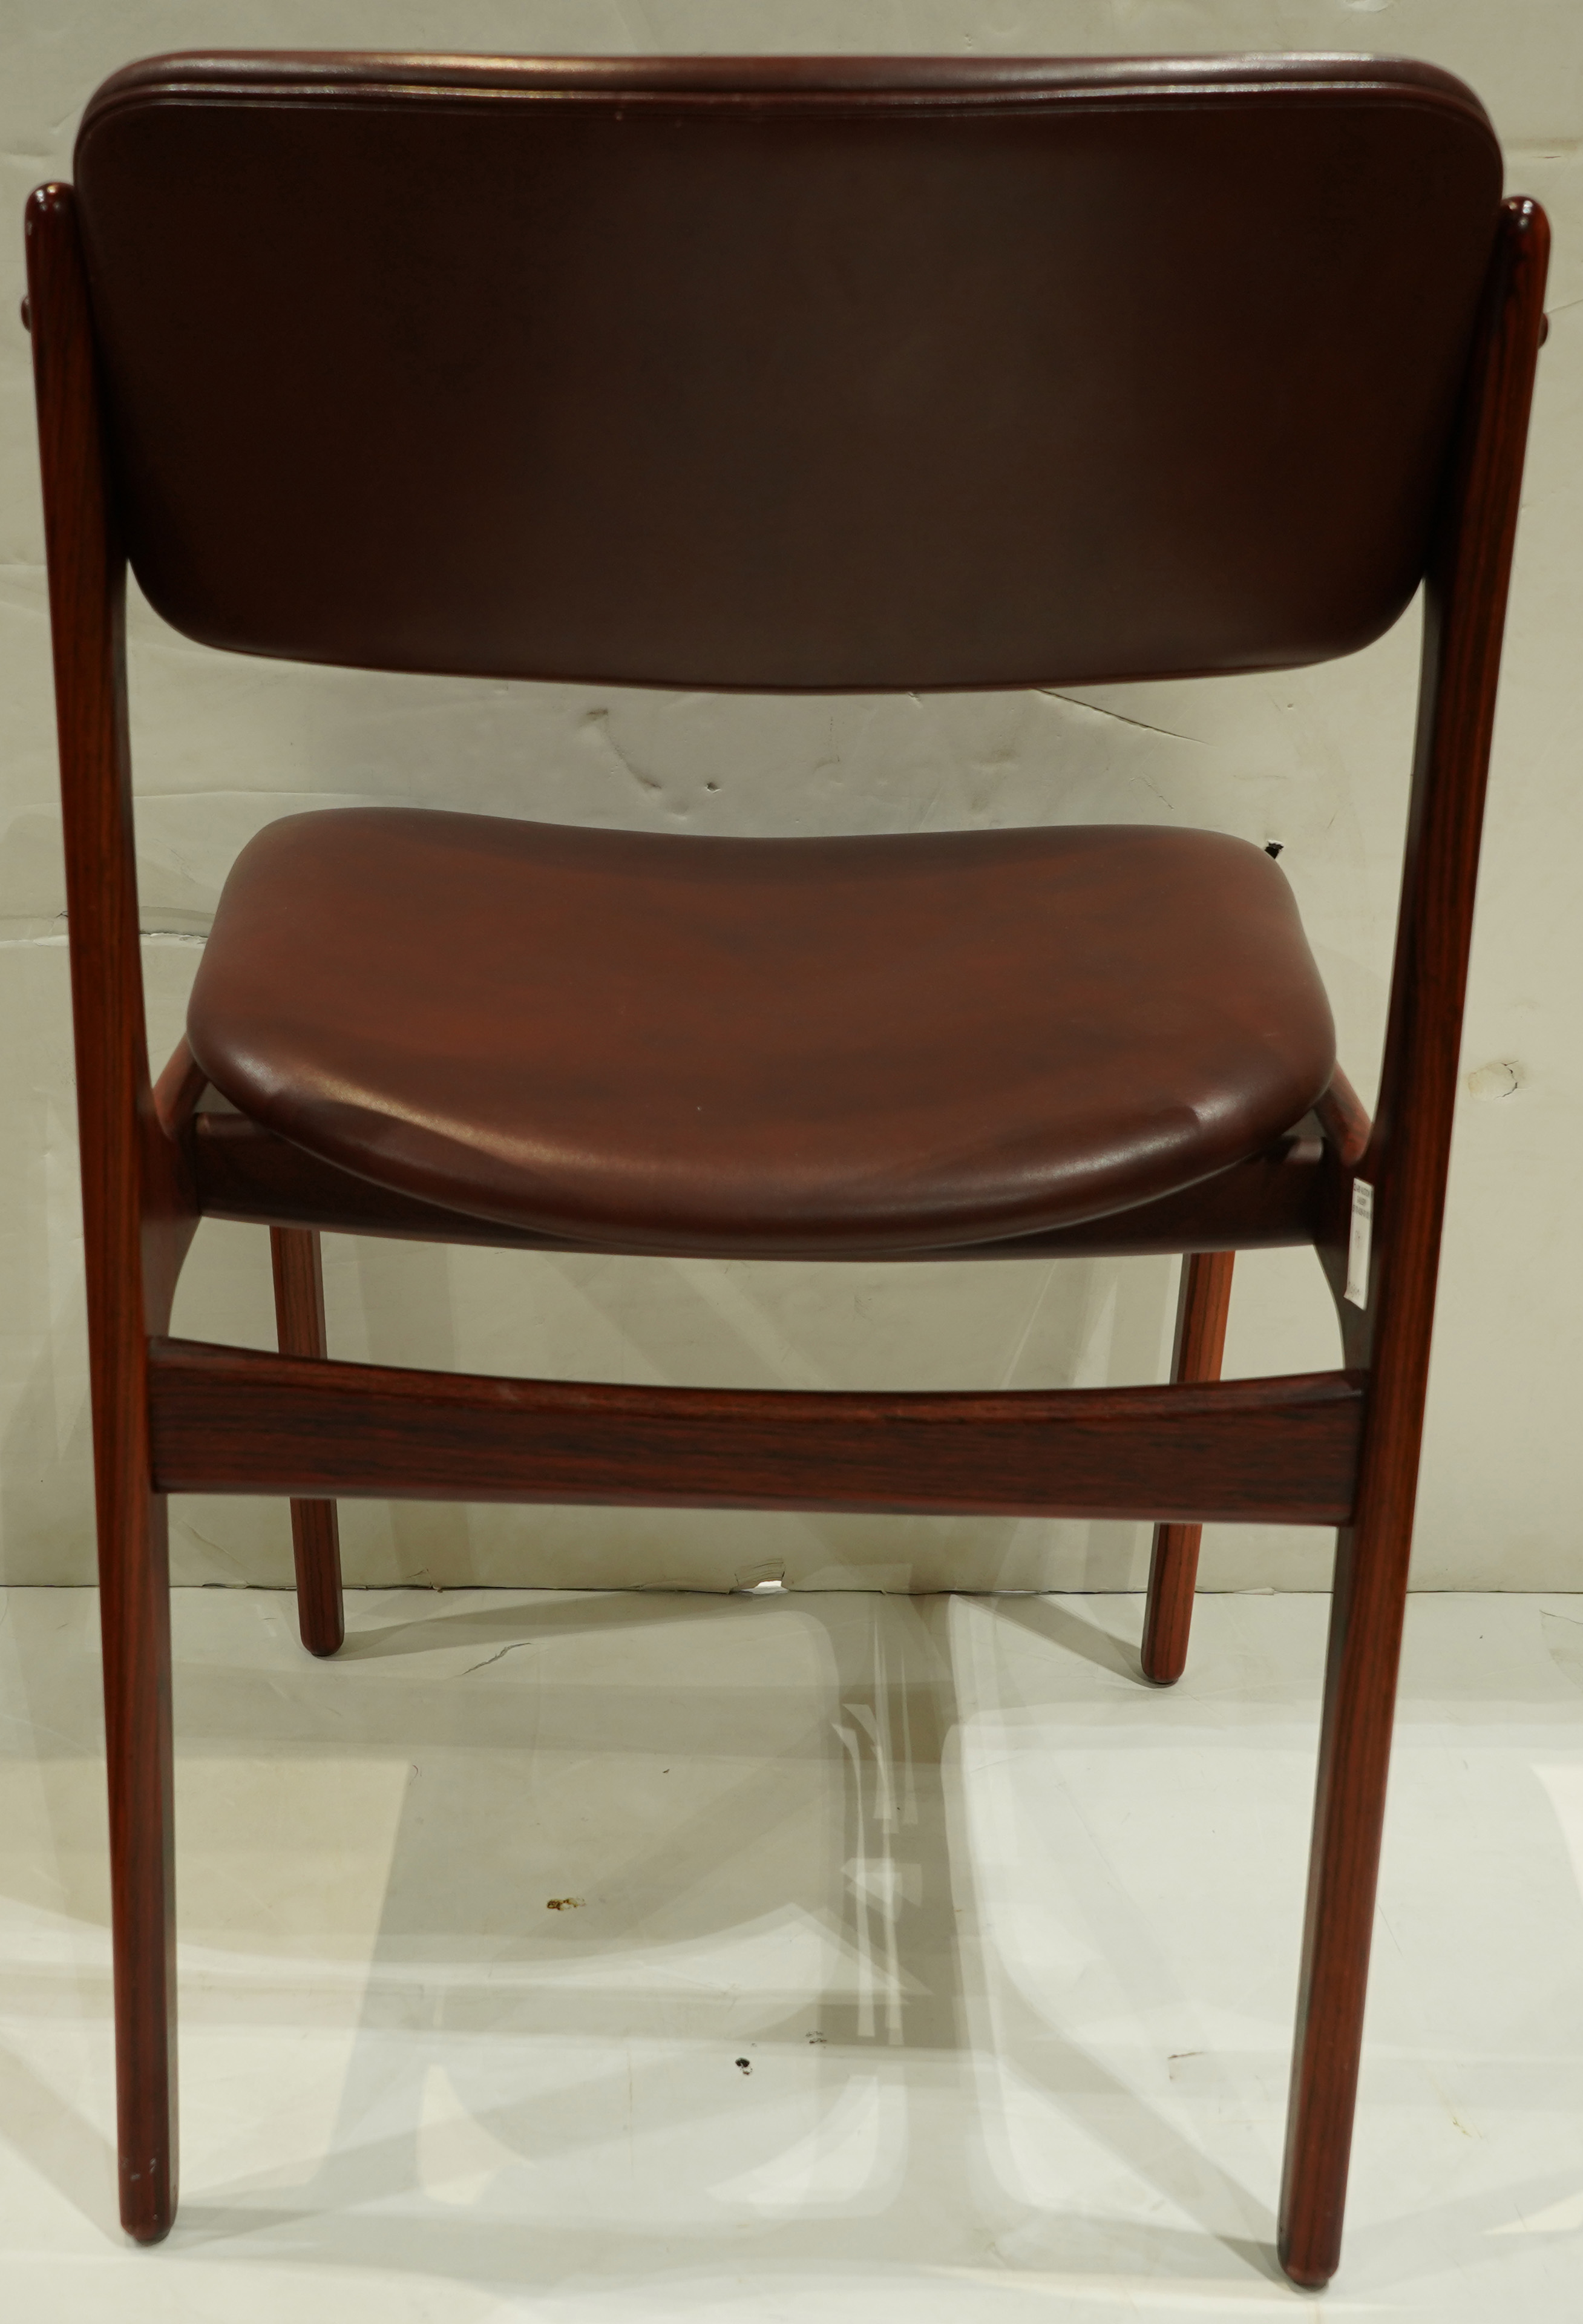 A group of Erik Buch Danish Modern rosewood chairs, model 49 - Image 5 of 5